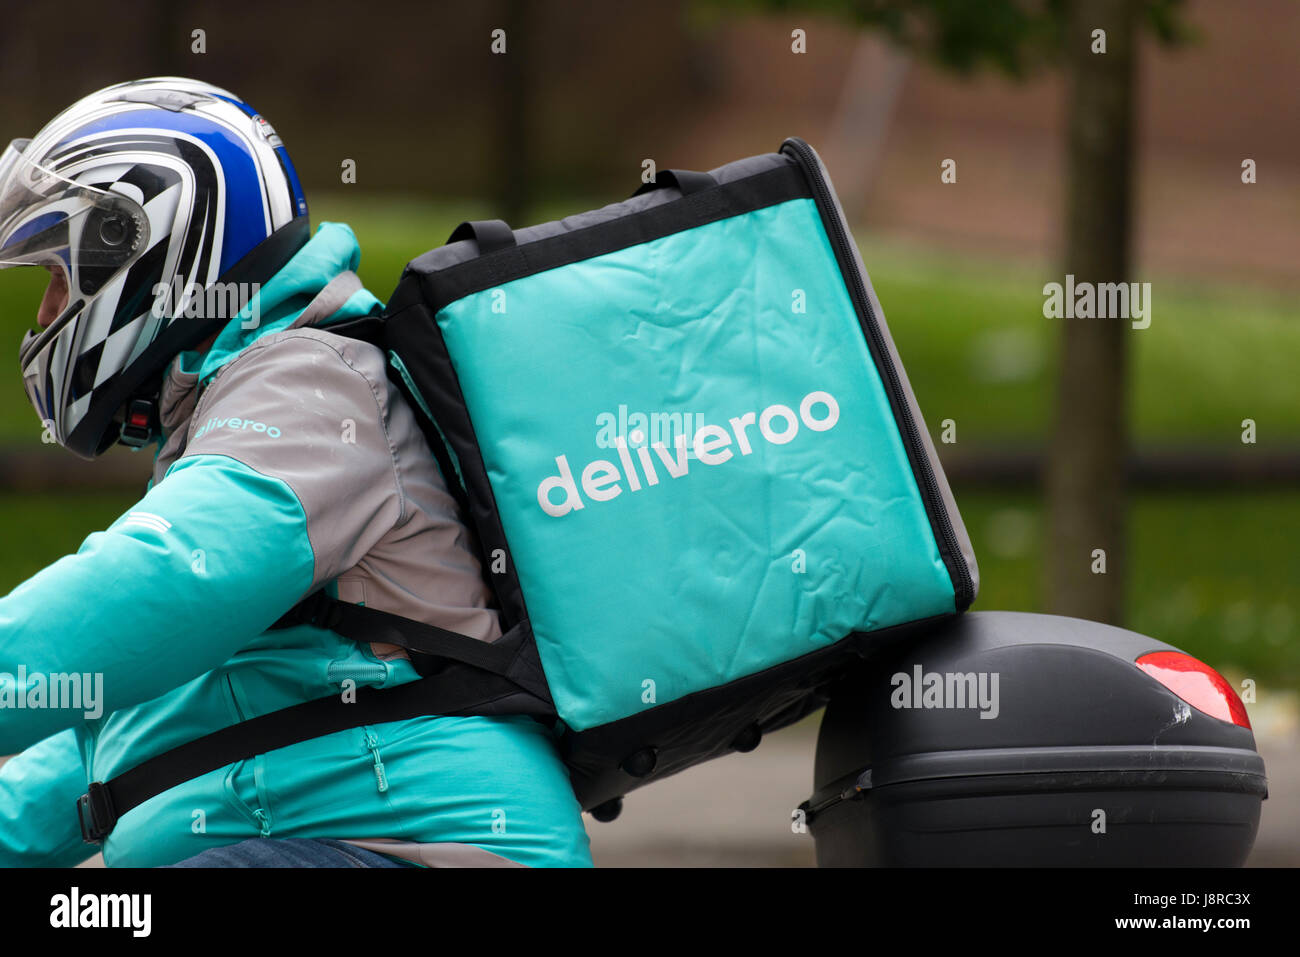 A Deliveroo rider on a moped making a food delivery in Cardiff, Wales, UK. Stock Photo